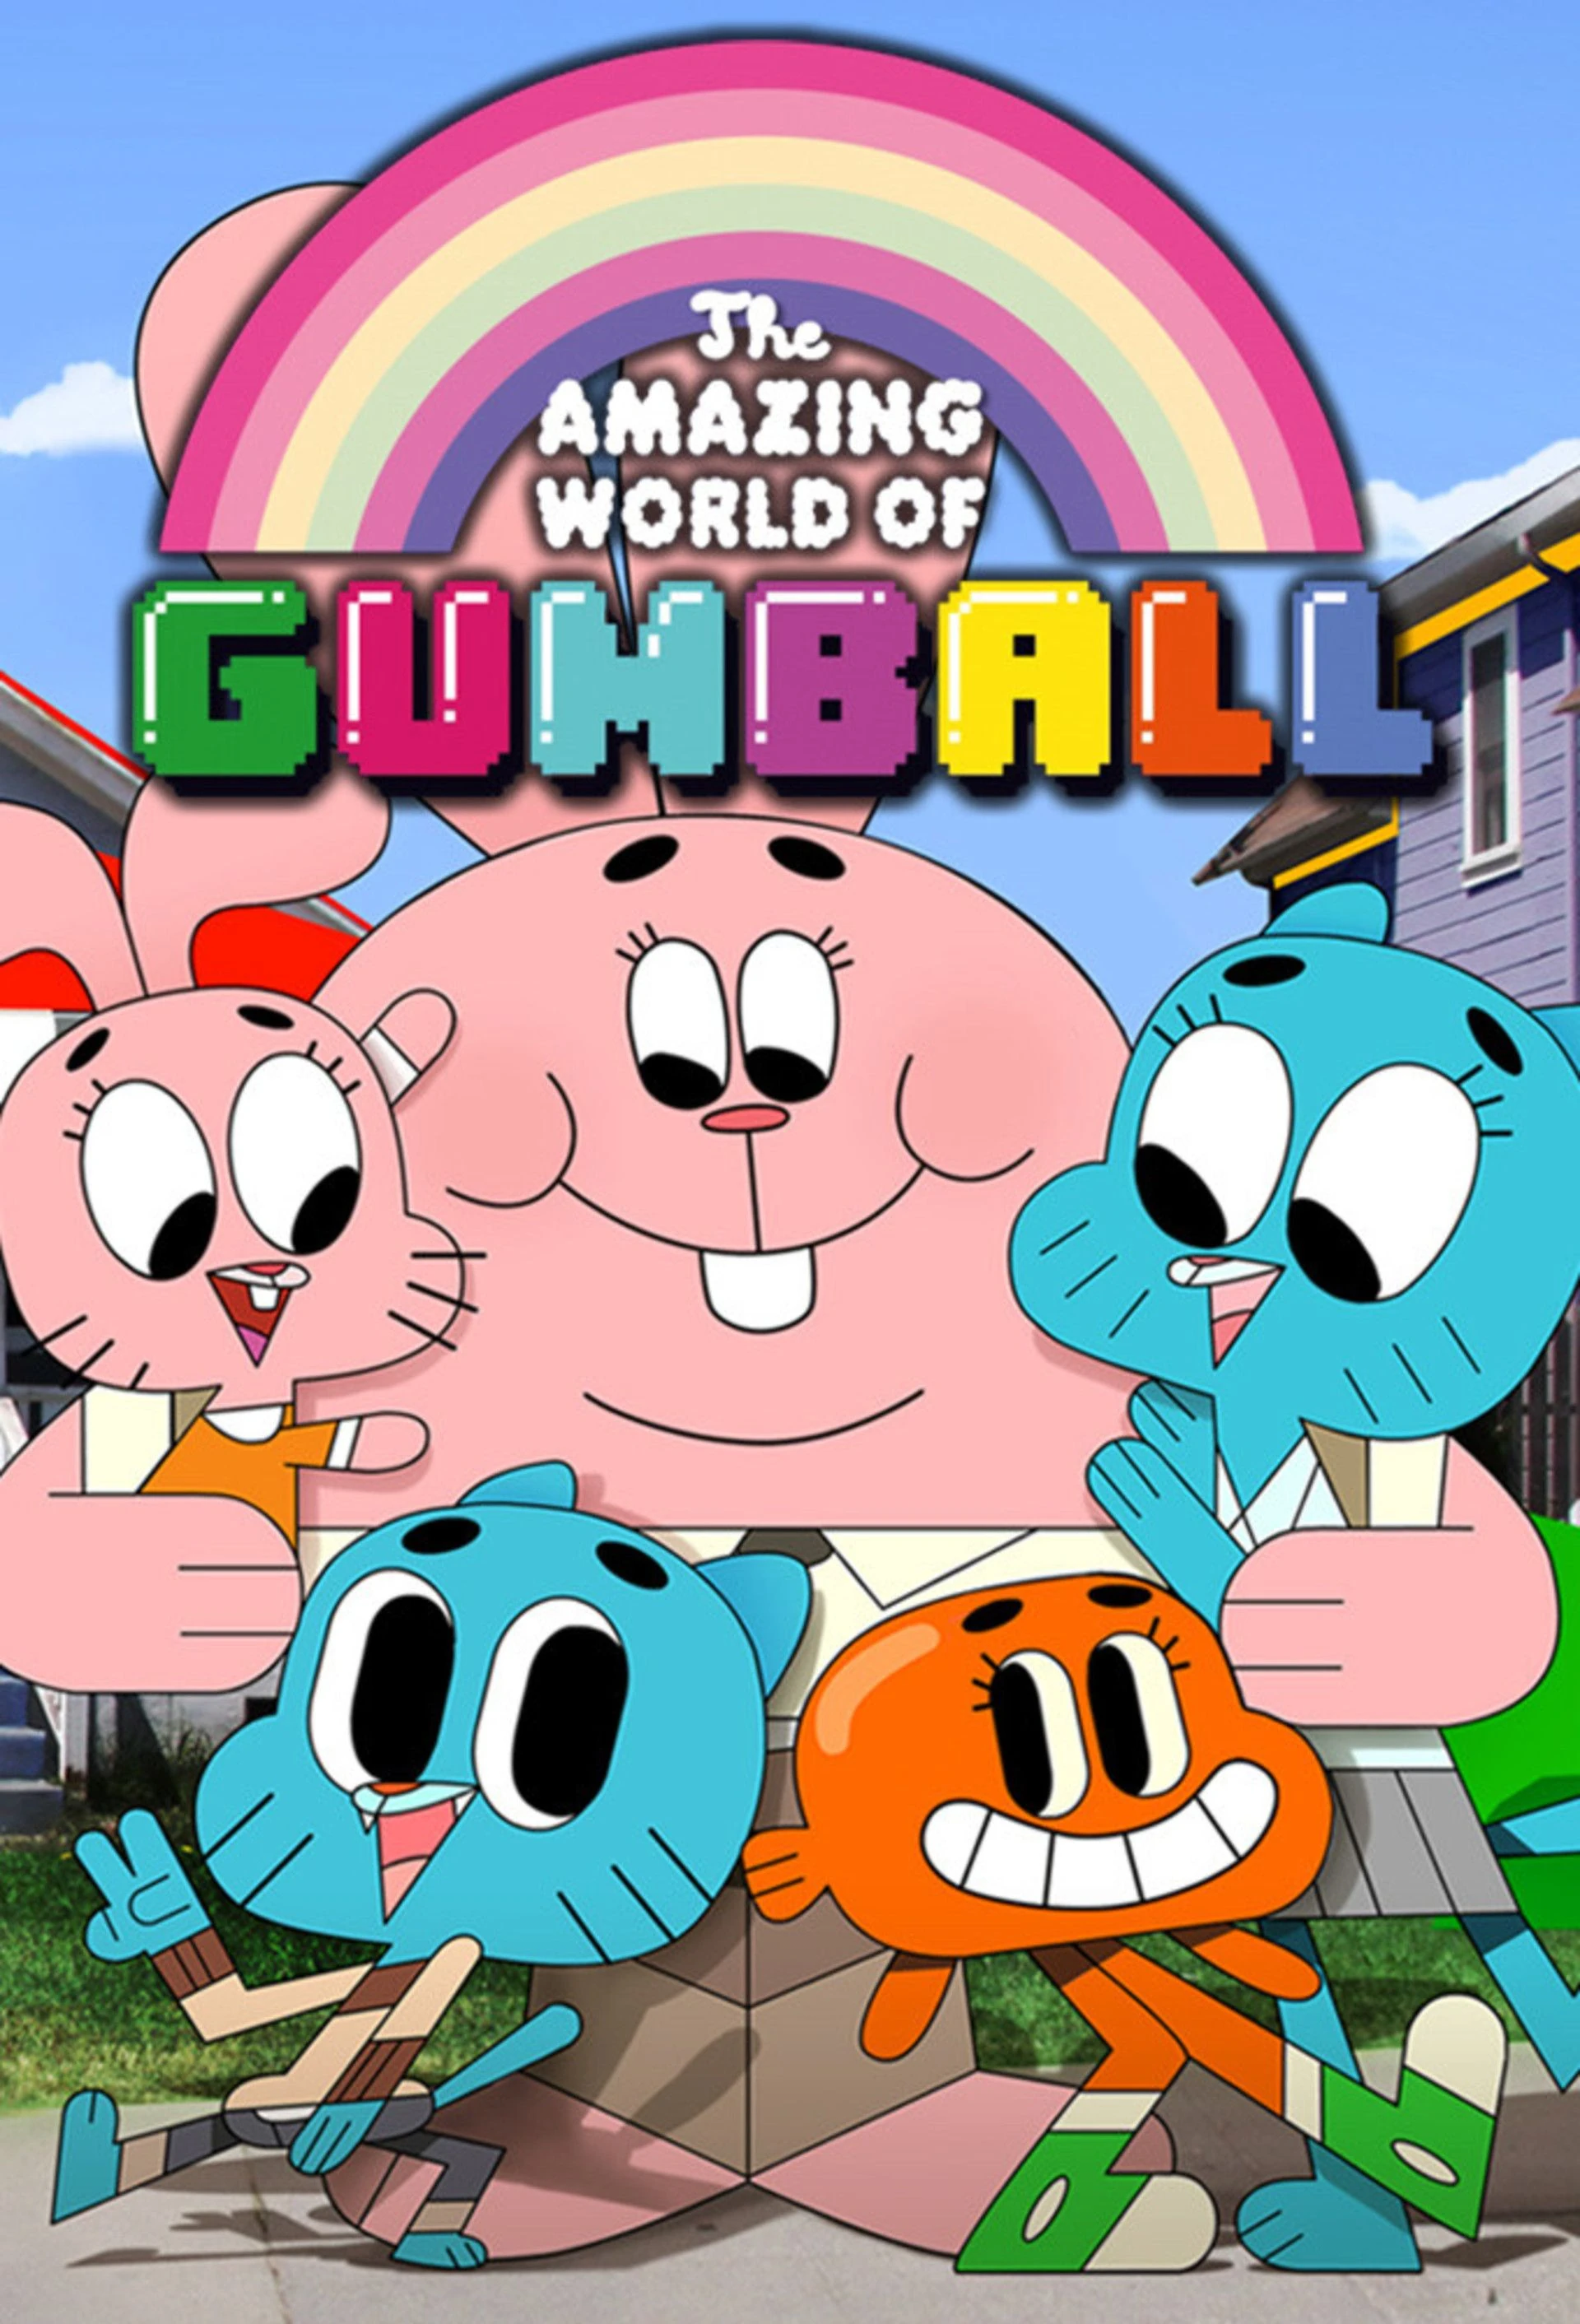 A cover for The Amazing World of Gumball animated TV series about the adventures of an anthropomorphic blue cat and his friends